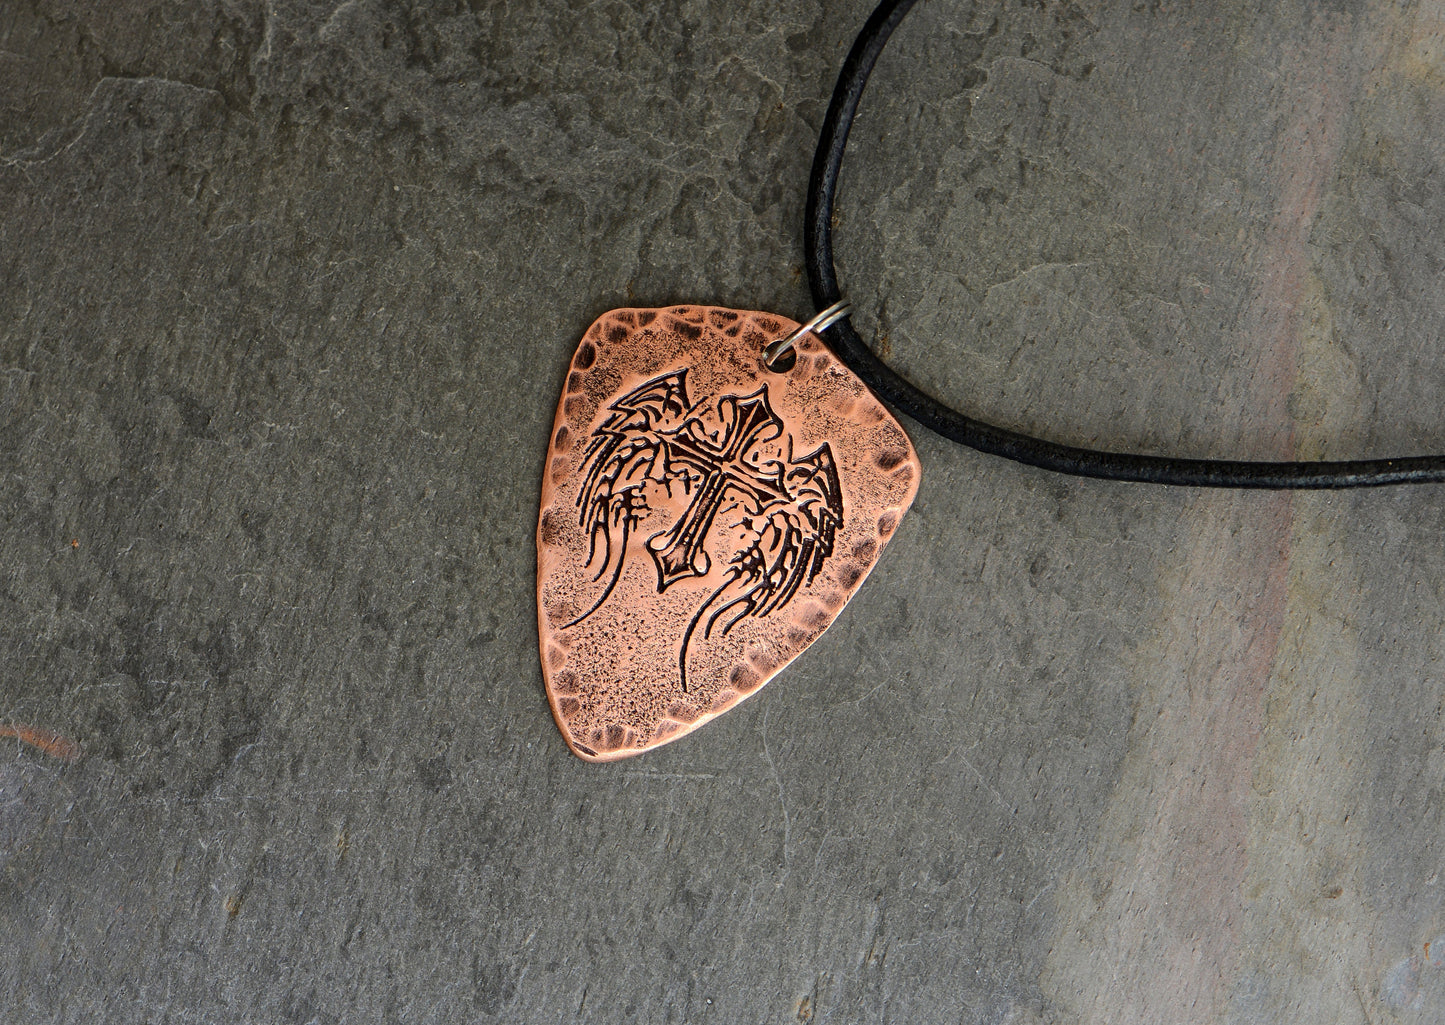 Shield style copper guitar pick necklace featuring a winged cross